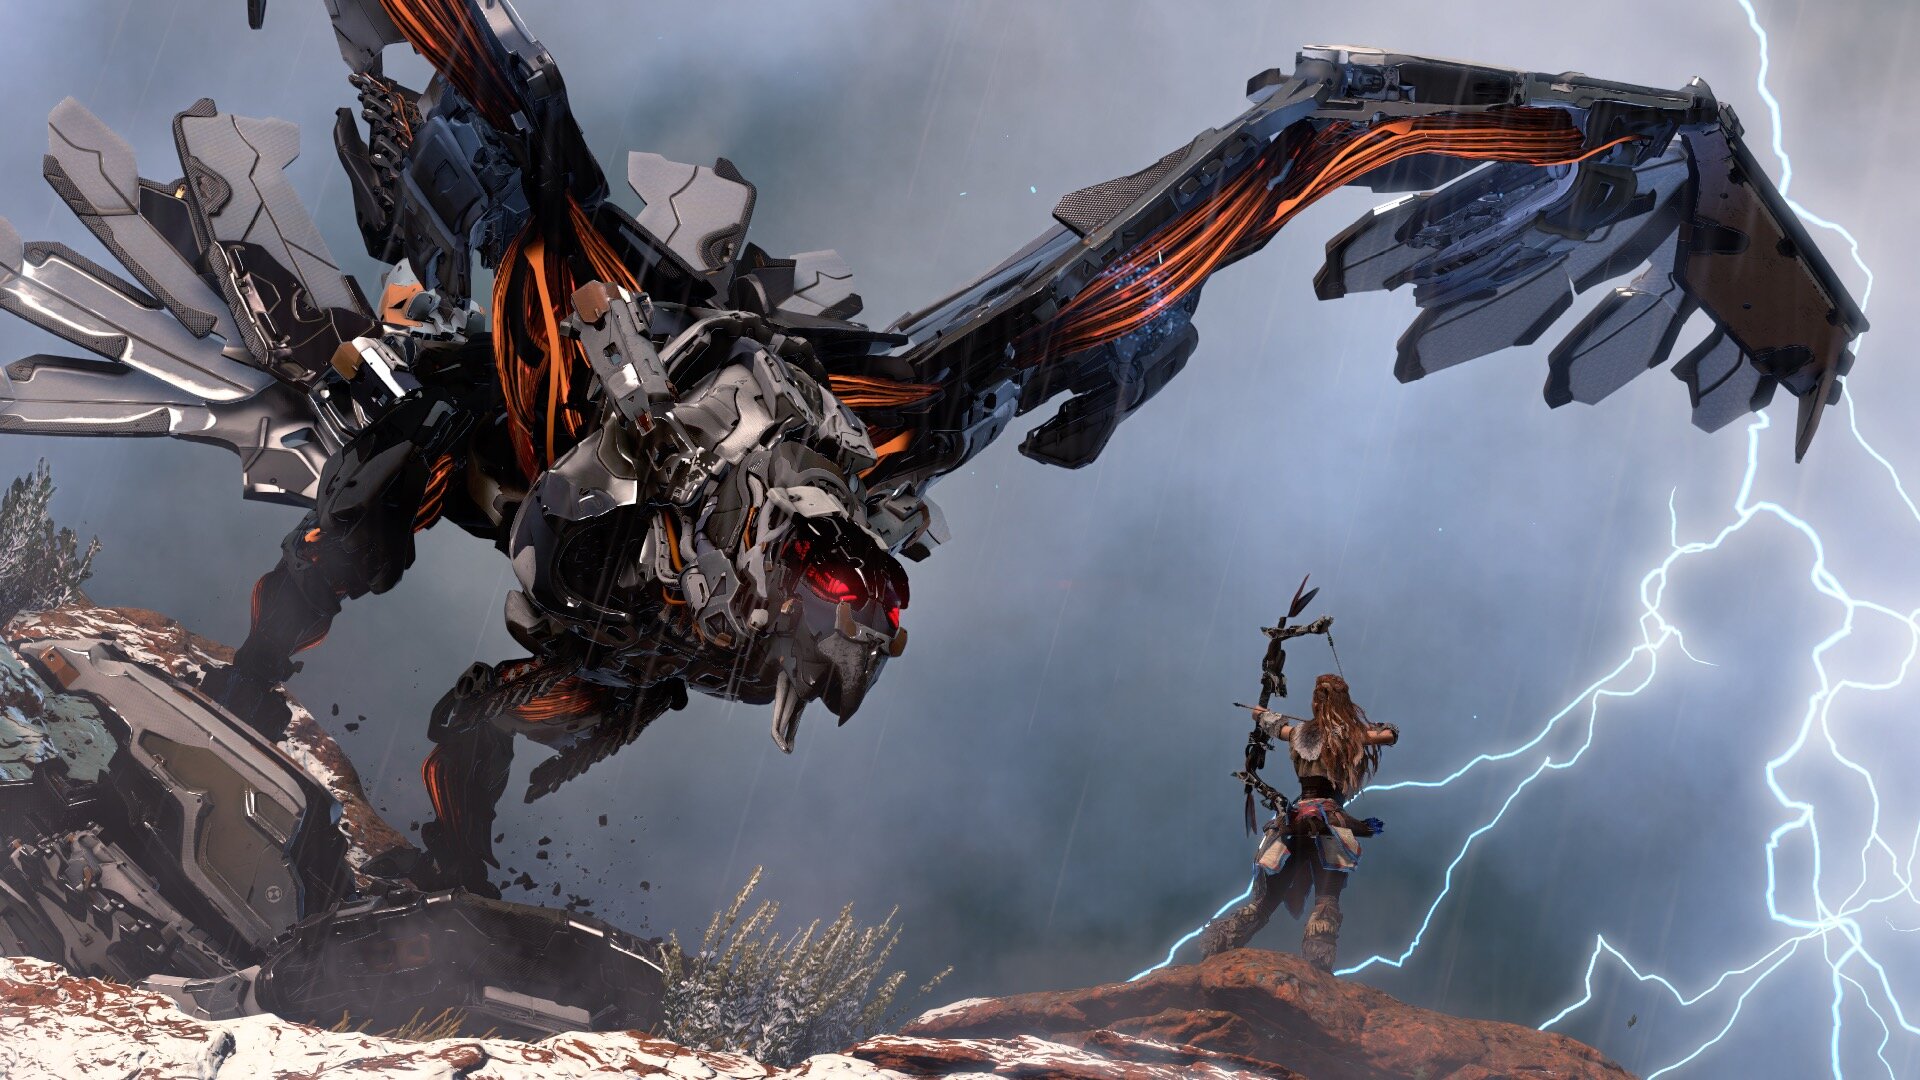 Horizon Zero Dawn Complete Edition for PC is available now! Get ready to  unleash devastating tactical attacks against your prey with these helpful  machine hunting tips. - Epic Games Store